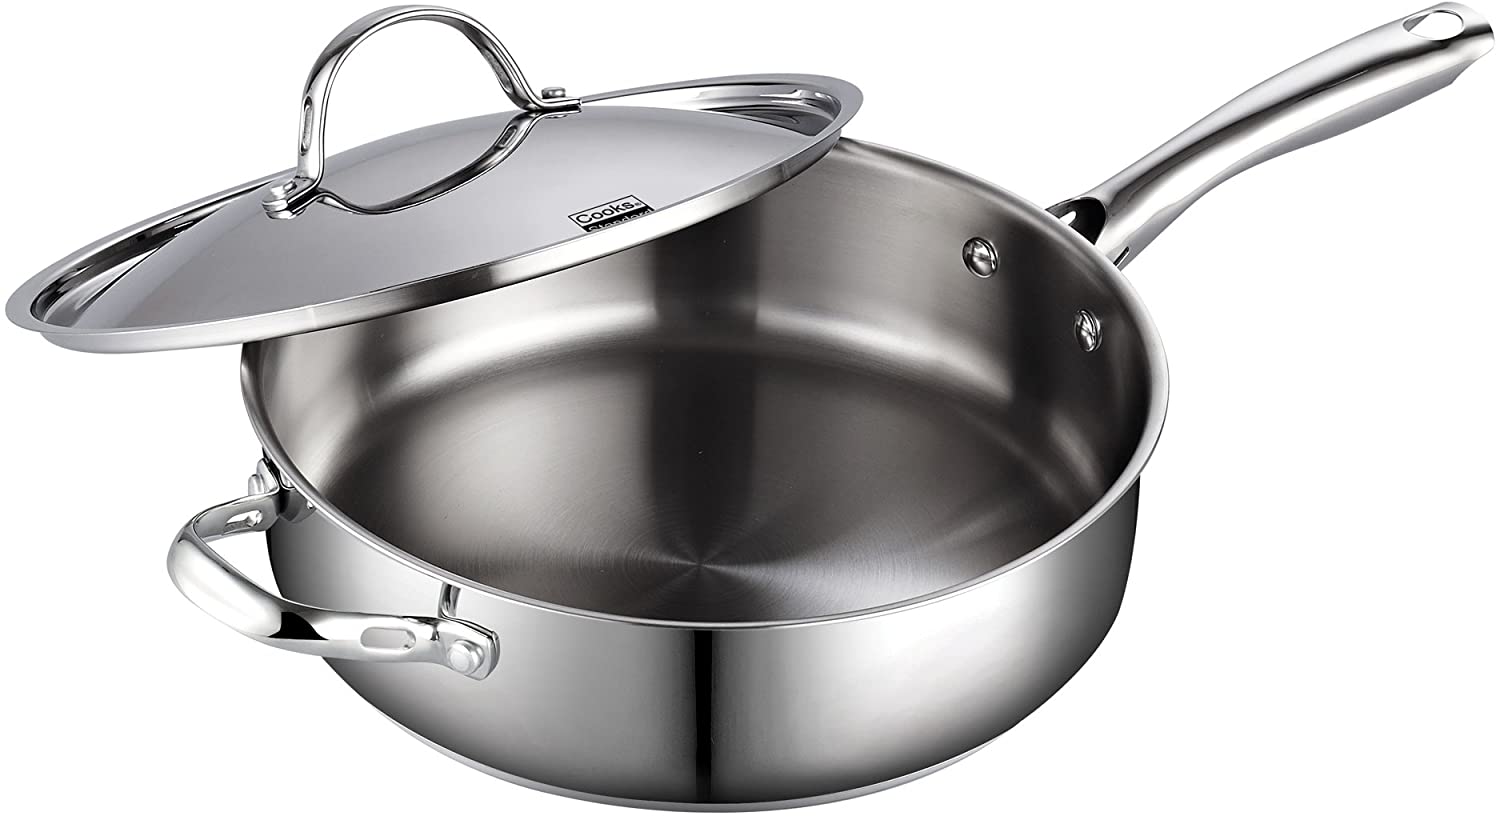 Cooks Standard Hard Anodize 11 Deep Saute Pan with Cover, 5-qt